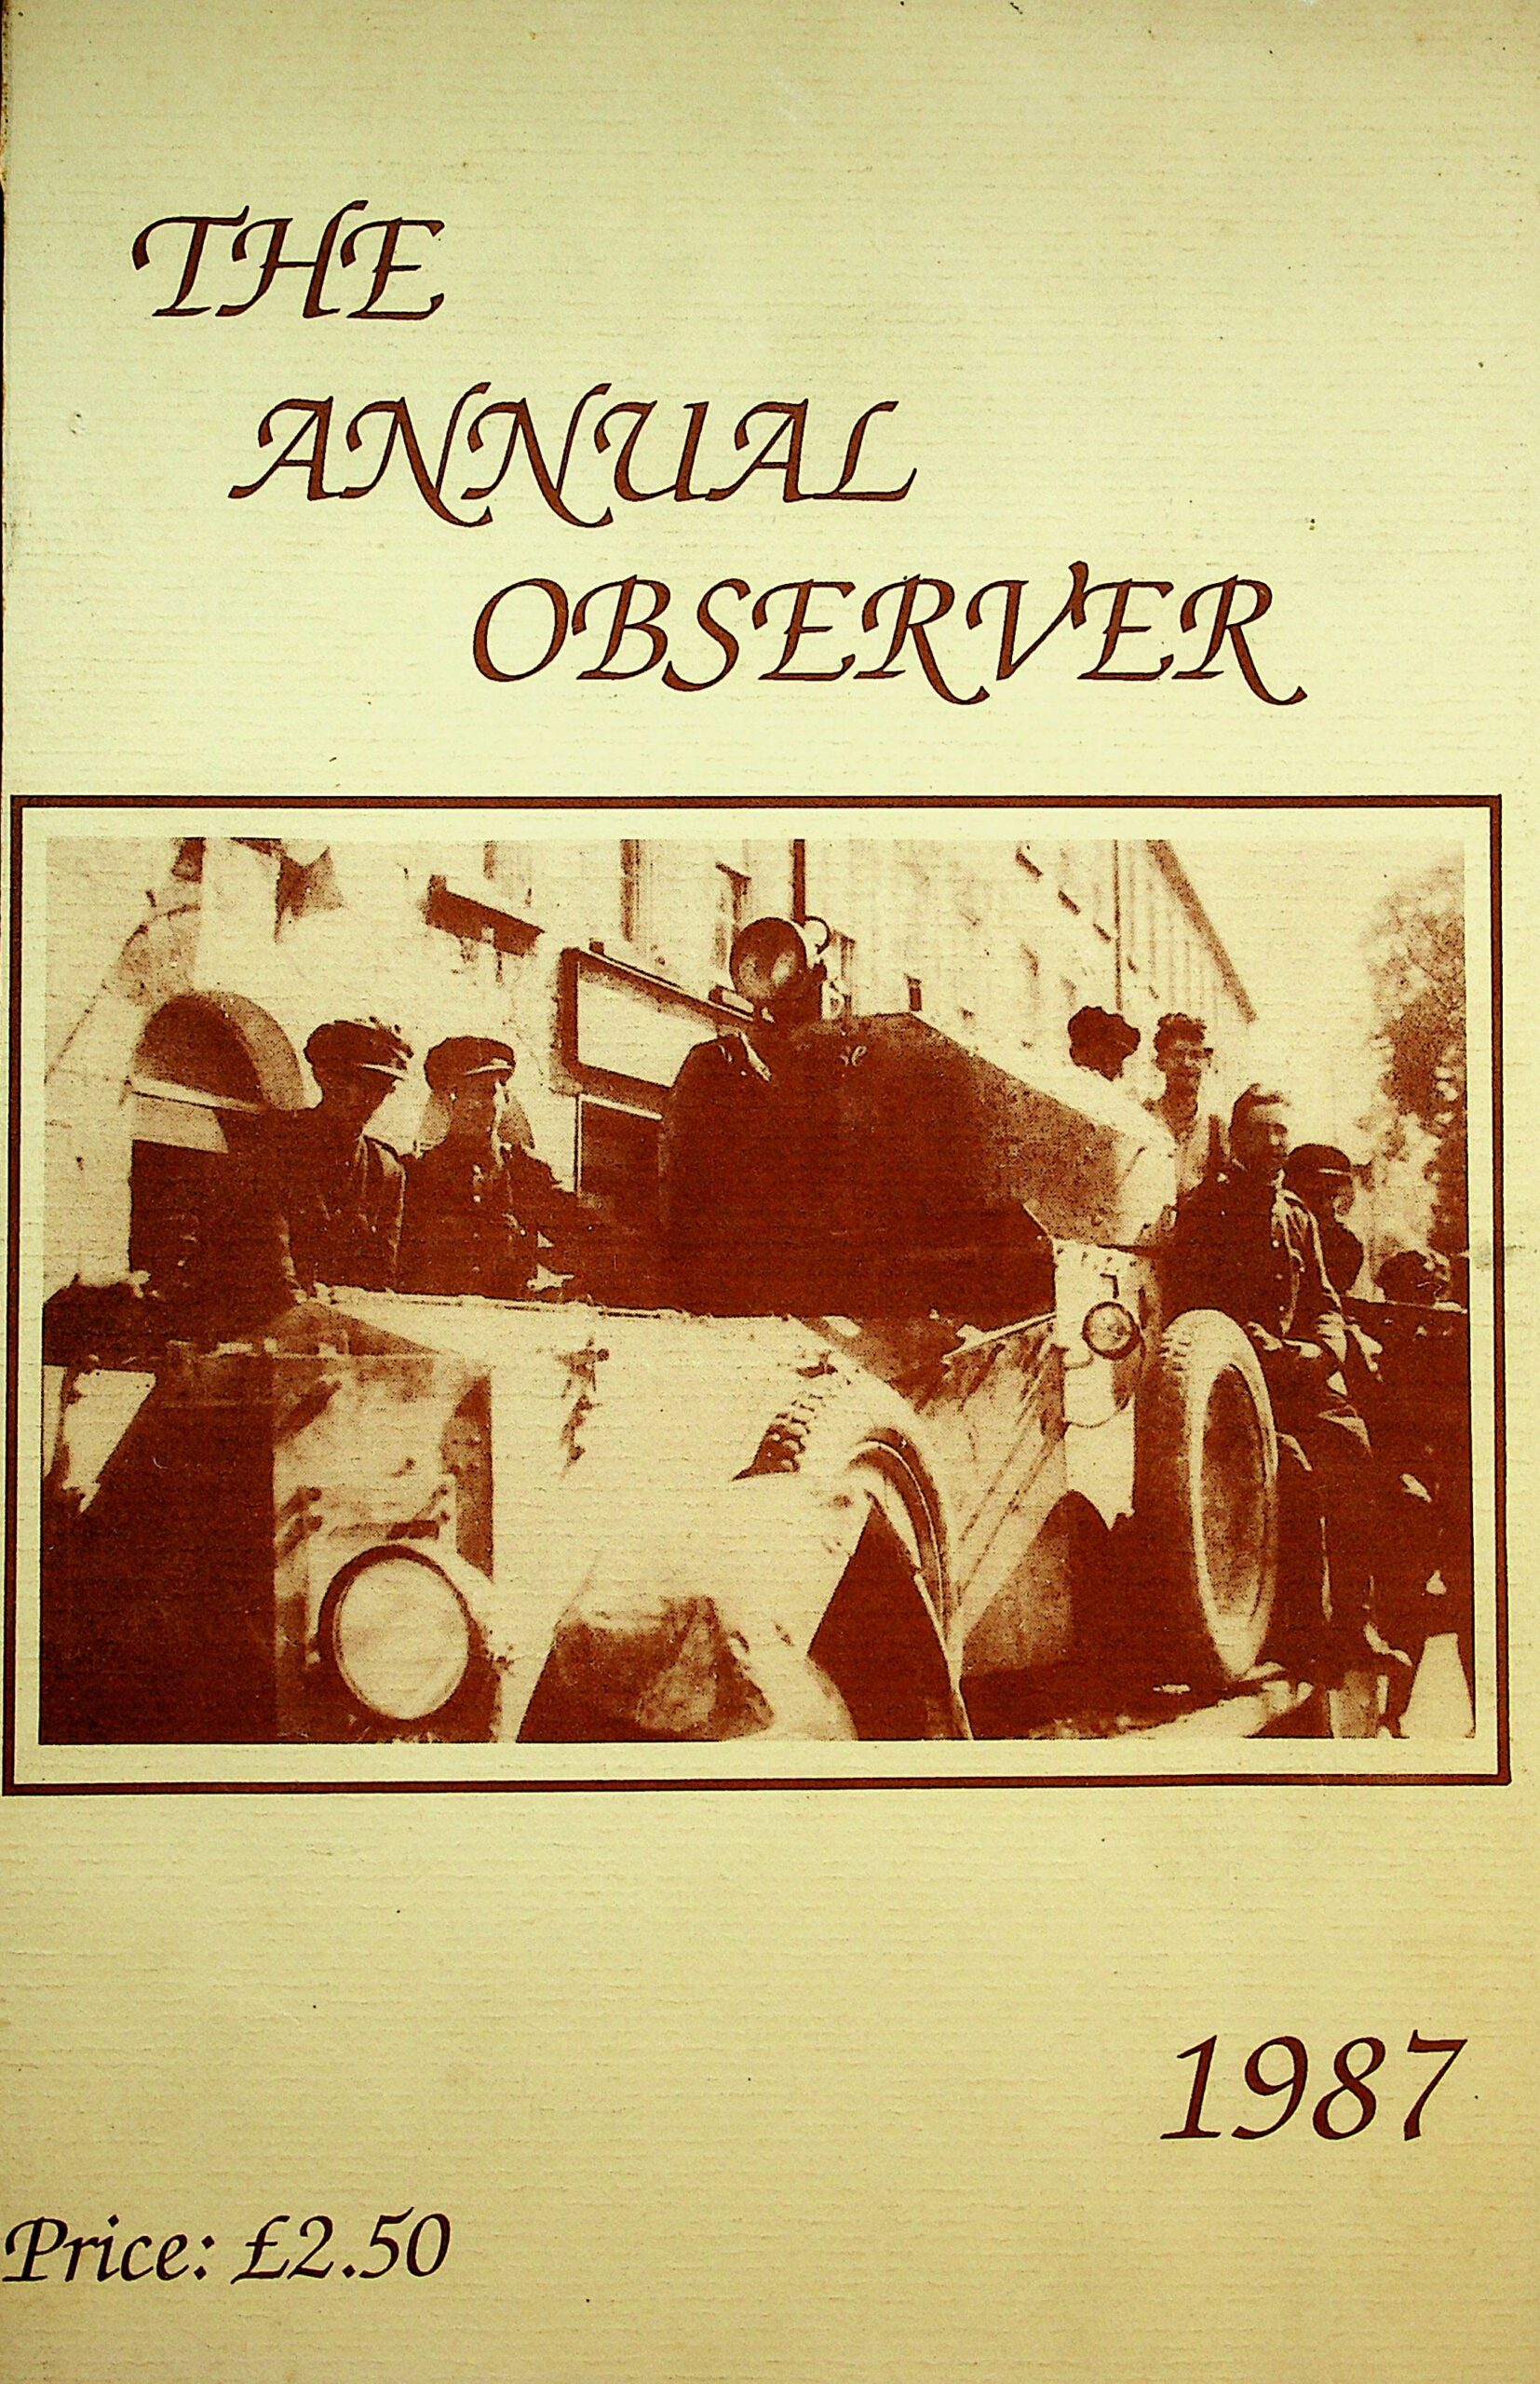 The Annual Observer